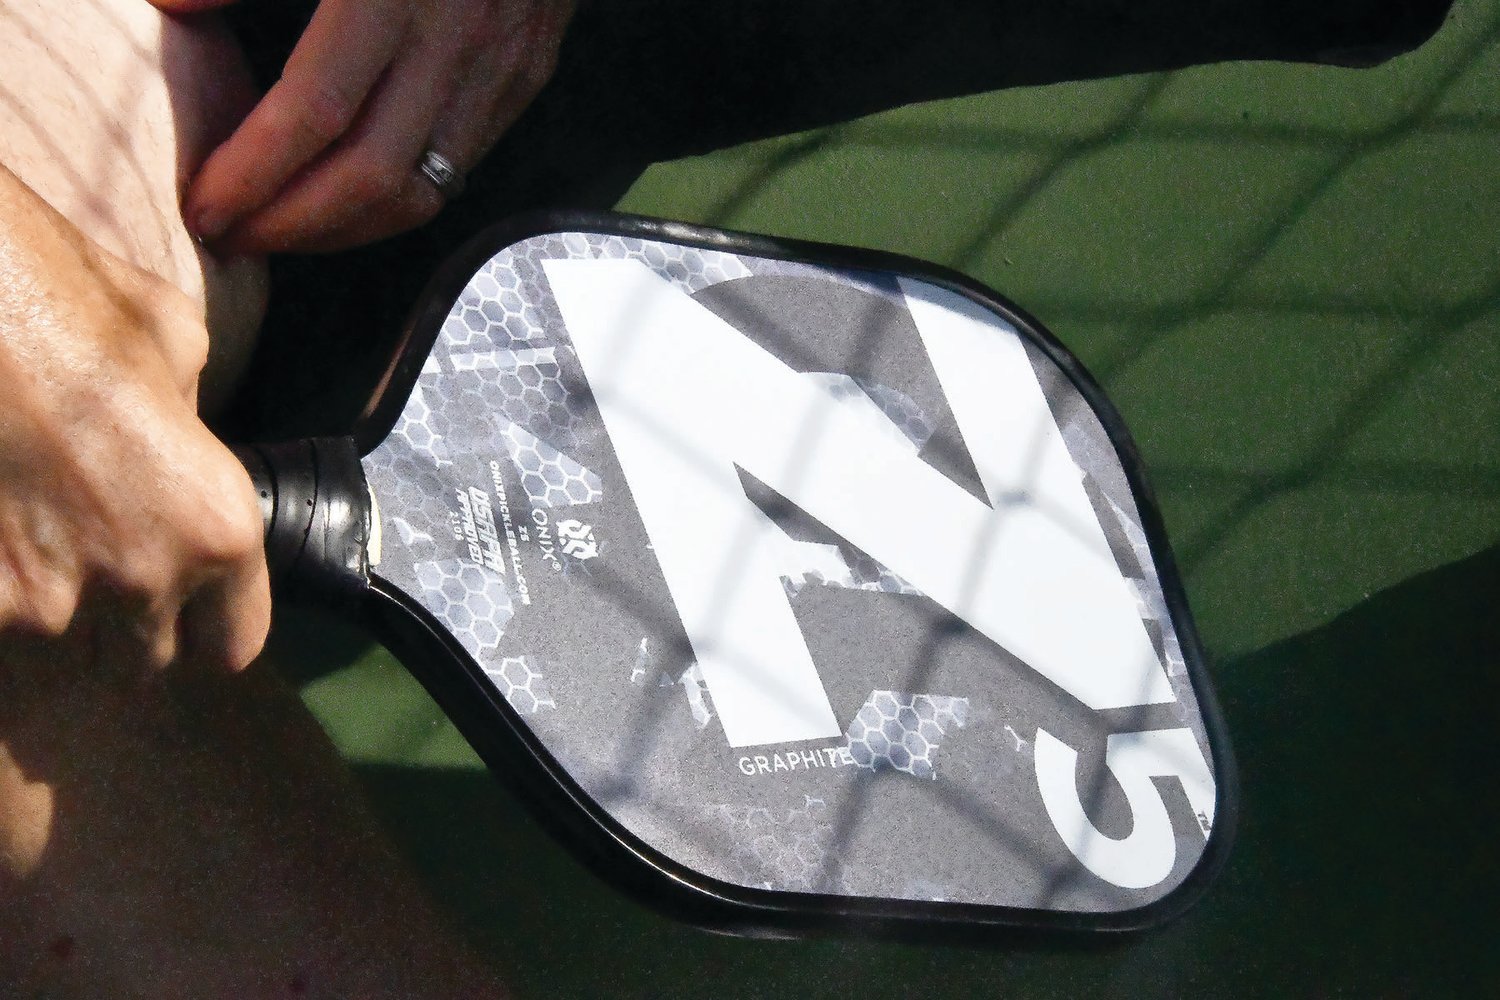 Here’s an example of a pickleball paddle. This one is an Onix graphite composite Z5 model.